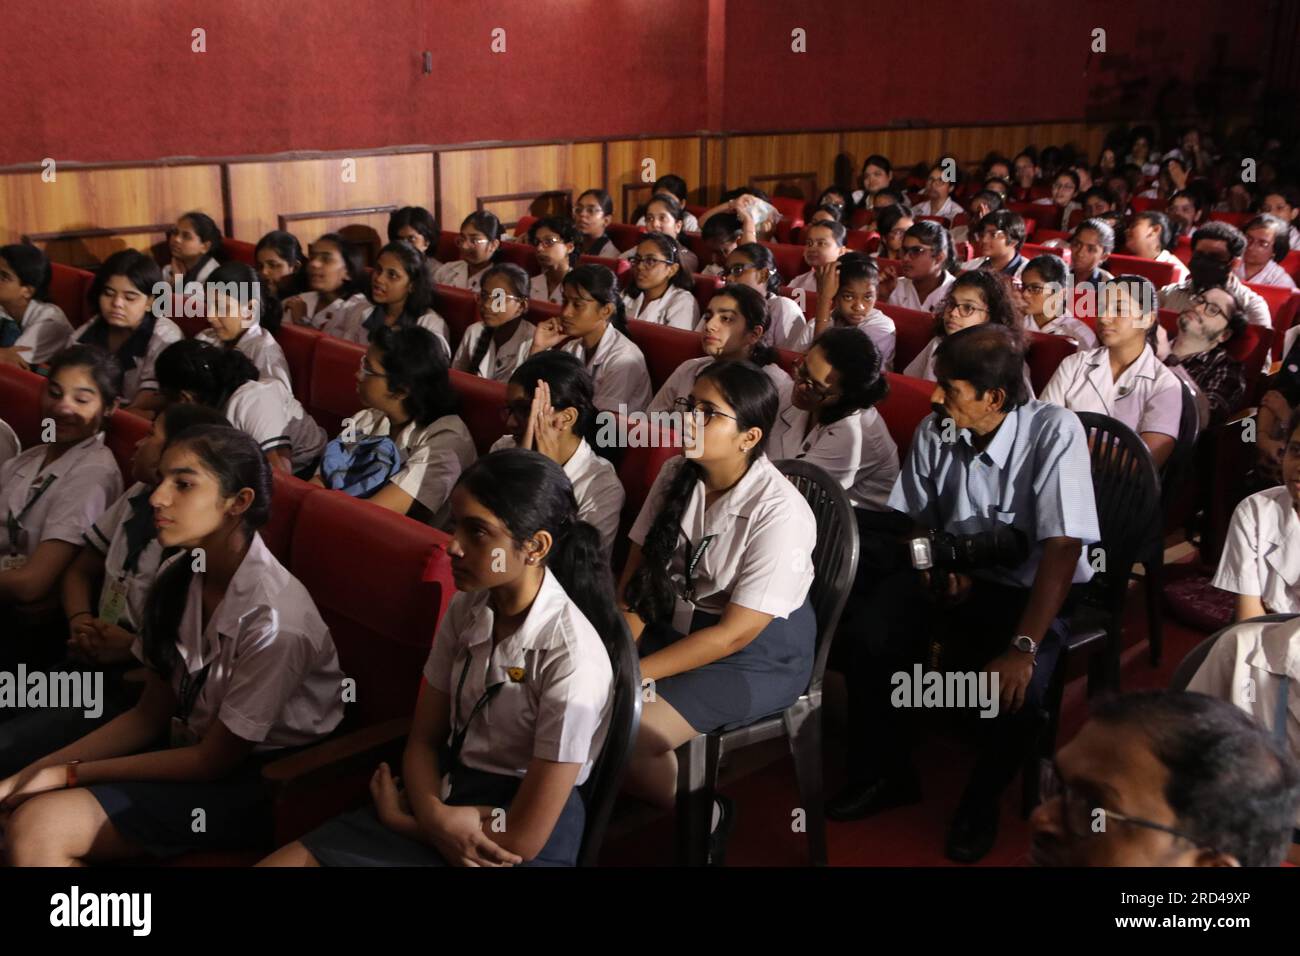 (7/14/2023) Mahadevi Birla School Students watch on live telecast of Chandrayaan-3 Mission at the Birla Industrial and Technological Museum (BITM) in Kolkata. Indian Space Research Organization (ISRO), a major constituent of the Department of Space (DOS), Government of India, launched a LVM3 (Launch Vehicle Mark III) M4 carrying the Chandrayaan-3 Mission at Satish Dhawan Space Centre (SDSC) in Sriharikota, Tirupati district of Andhra Pradesh, India. India's moon-landing mission Chandrayaan-3 consists of an indigenous propulsion module, lander module and a rover. (Photo by Dipa Chakraborty/Pac Stock Photo